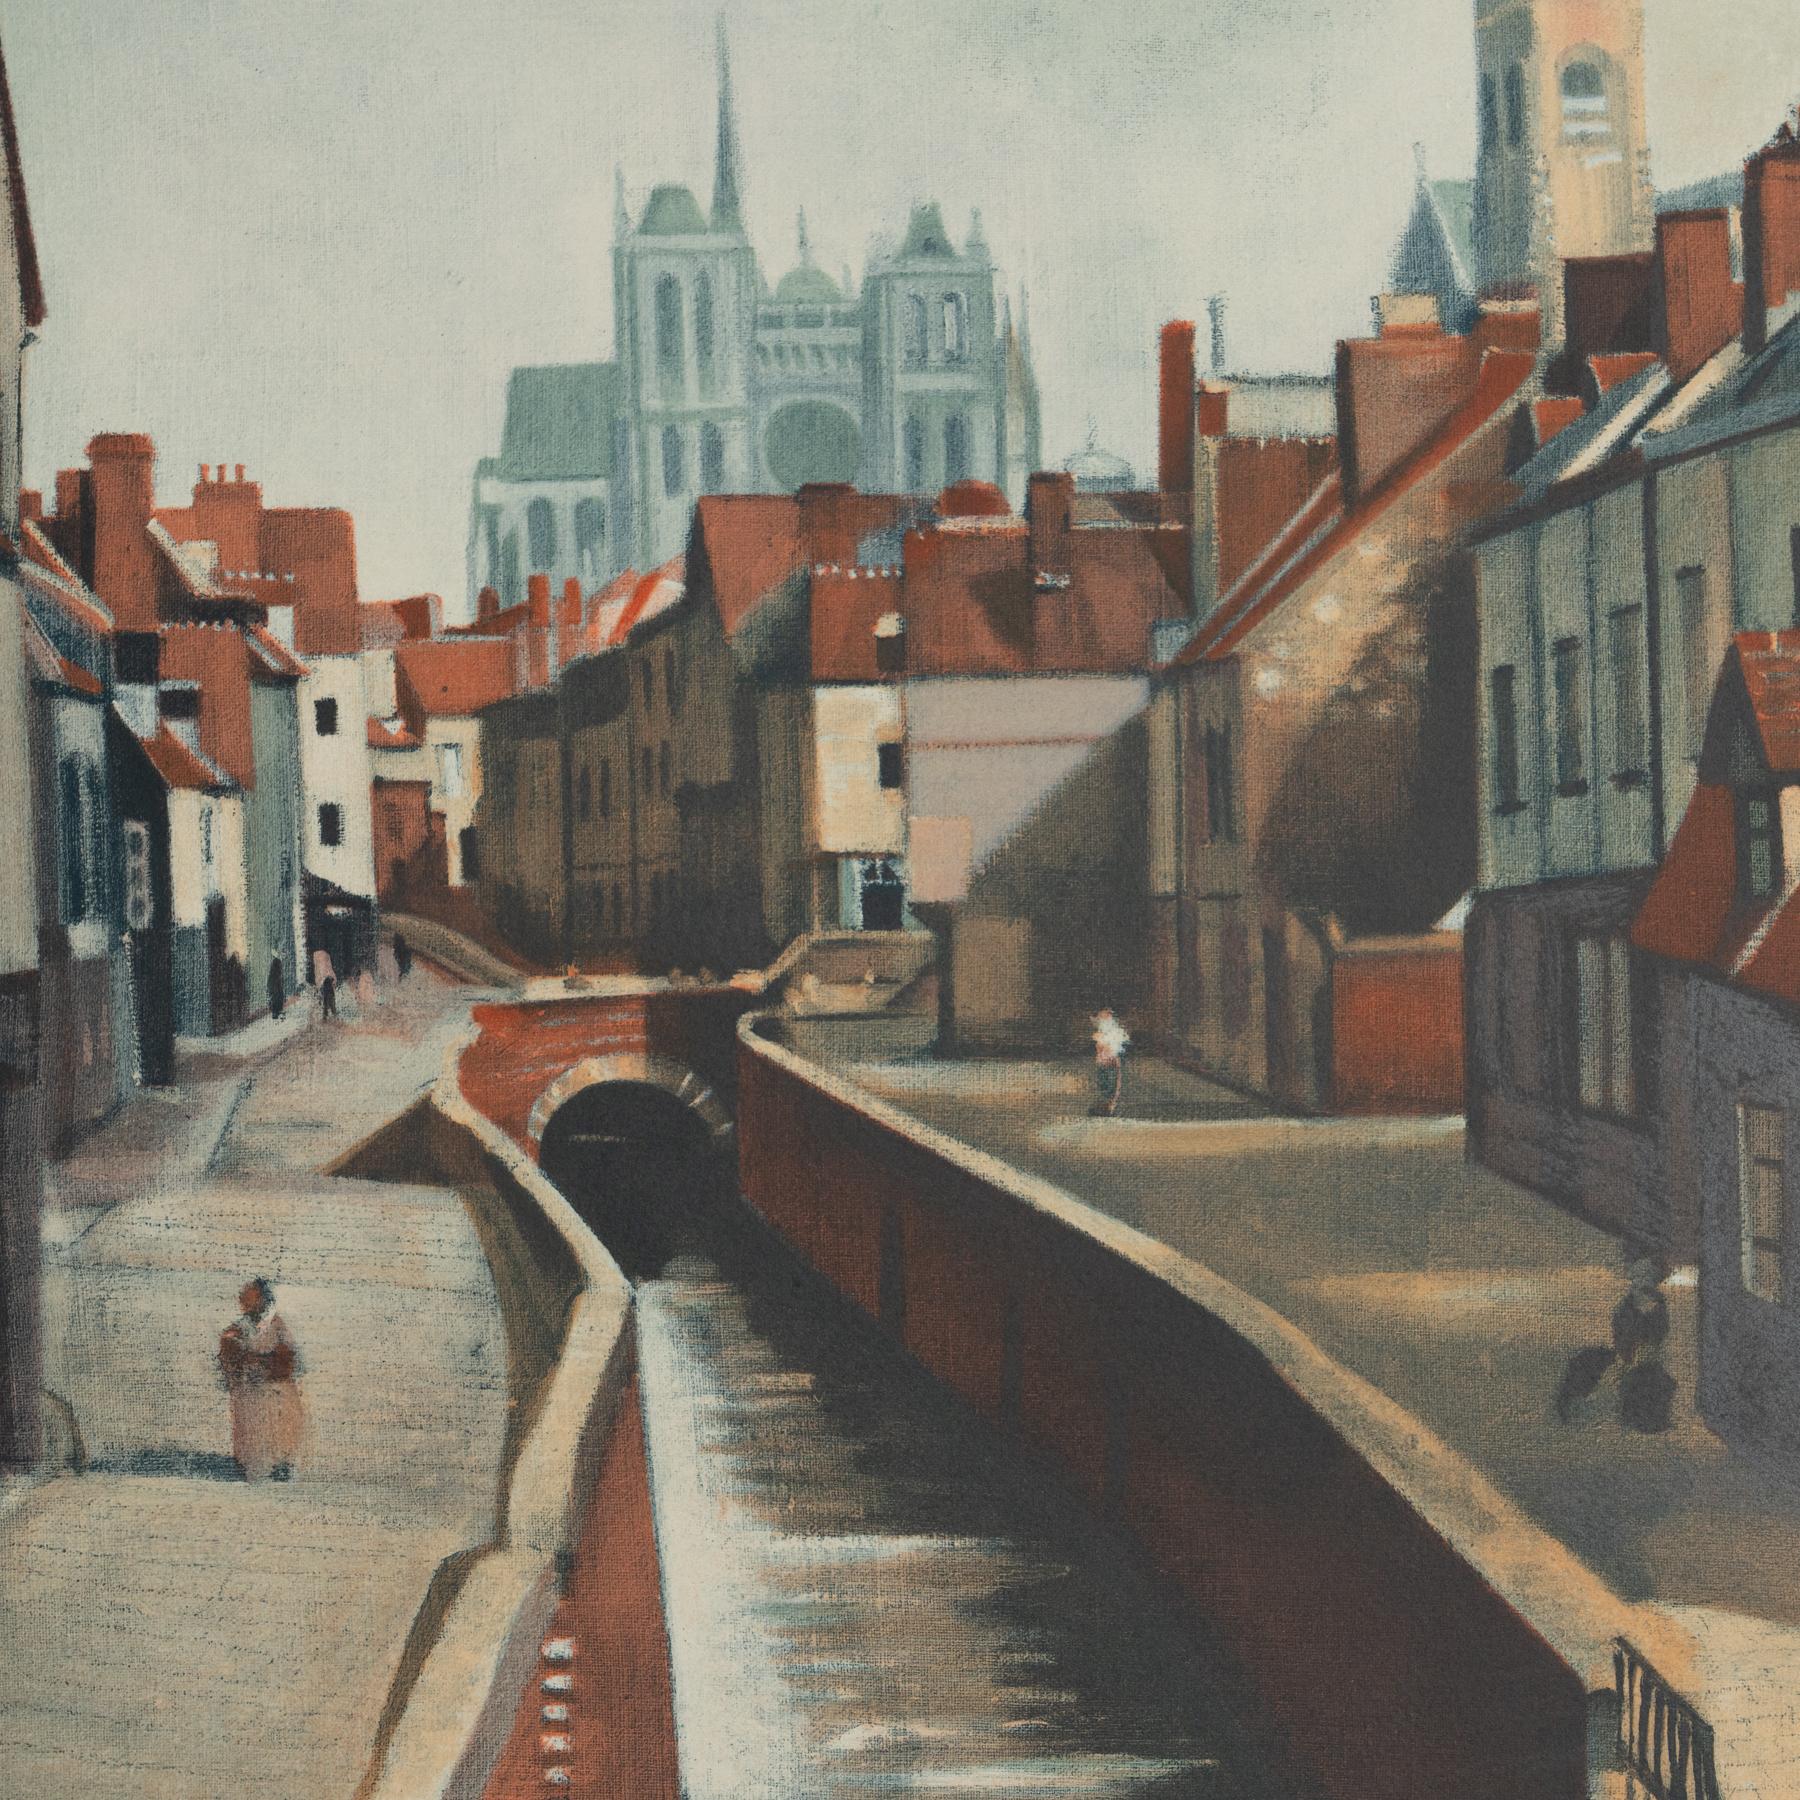 French André Derain Framed 'Amiens' Color Lithography, circa 1970 For Sale